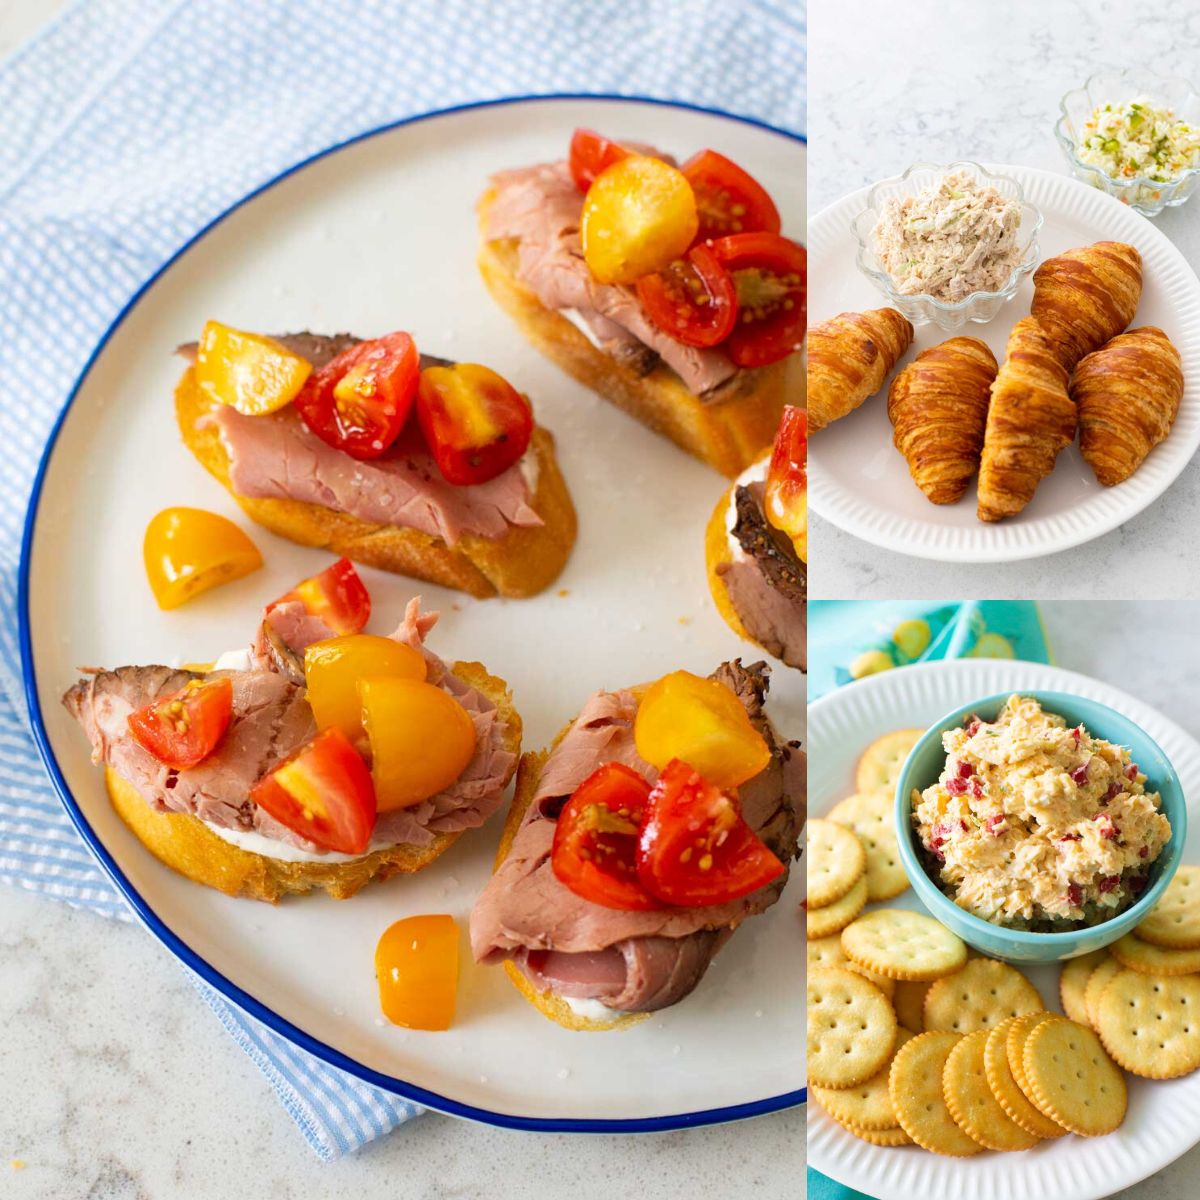 The photo collage shows 3 delicious main dishes for a picnic menu.